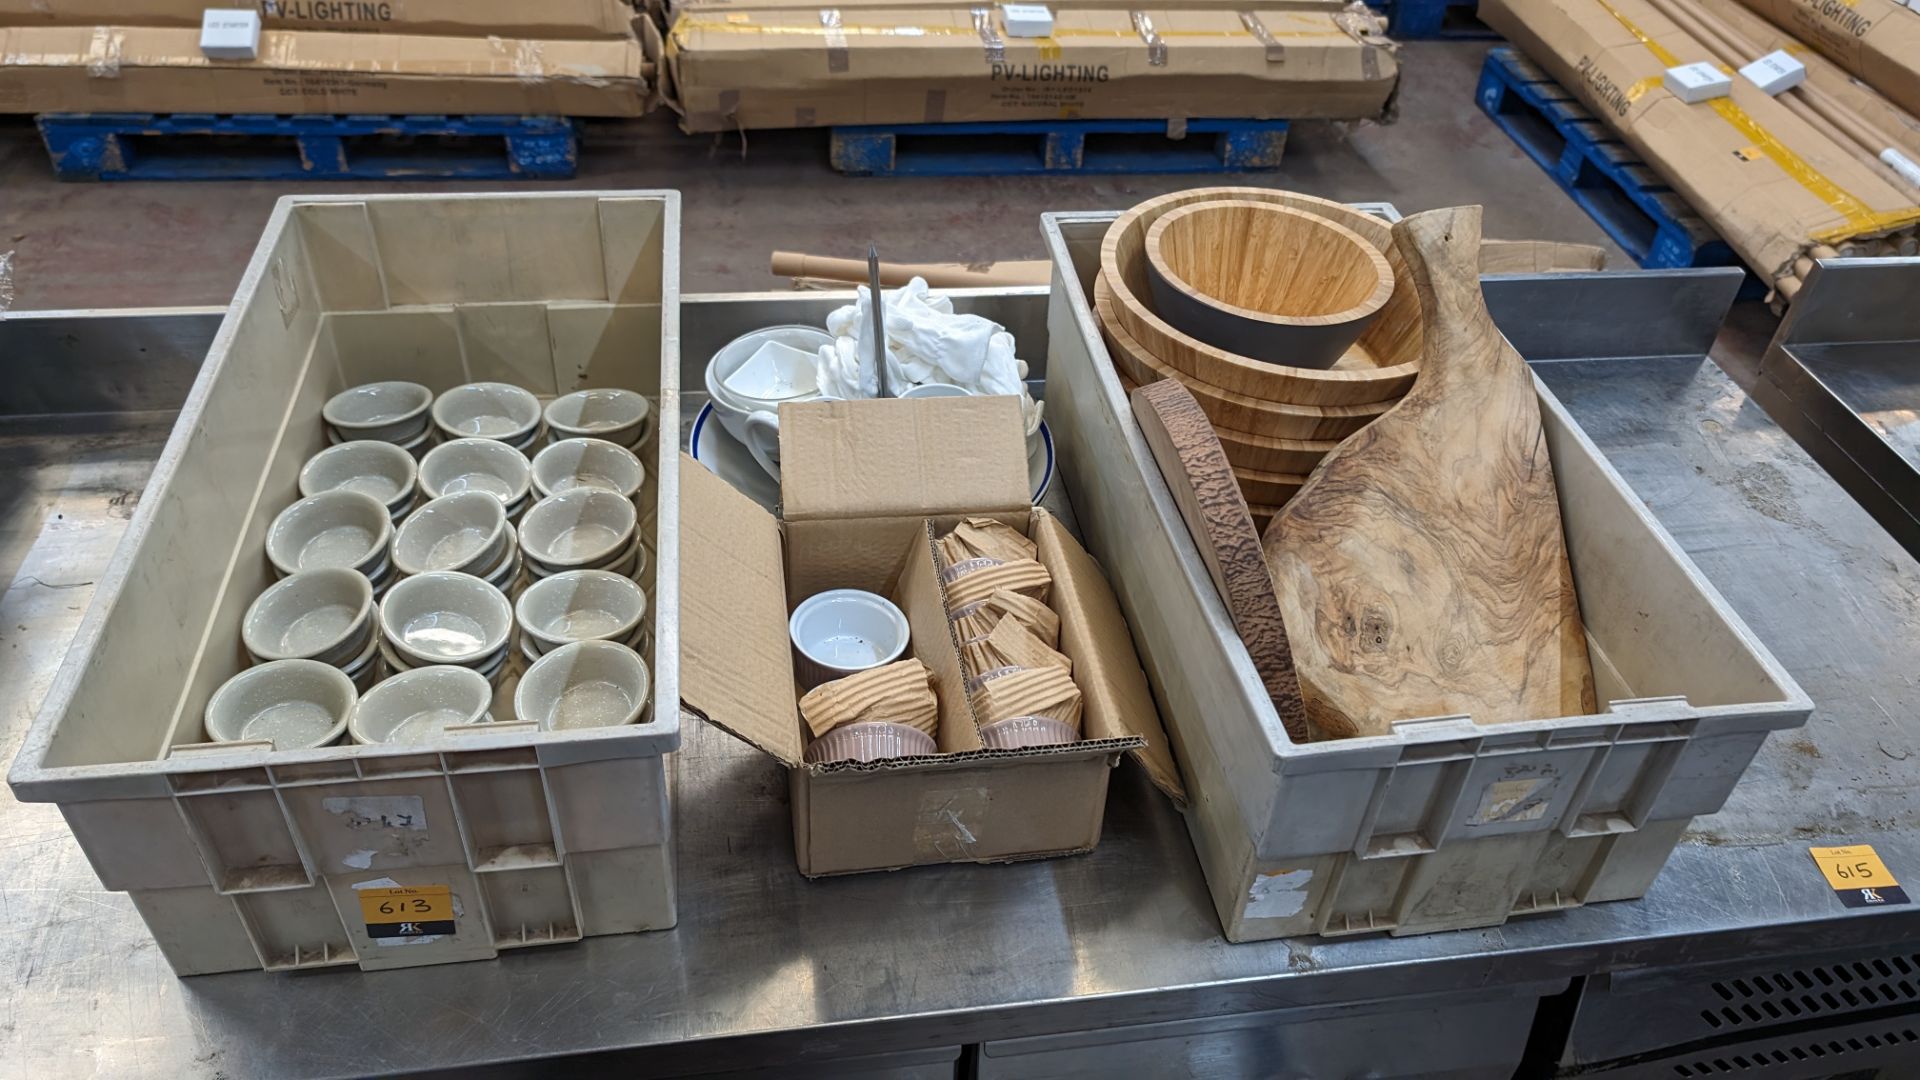 Quantity of ramekins and other crockery, wooden bowls and more